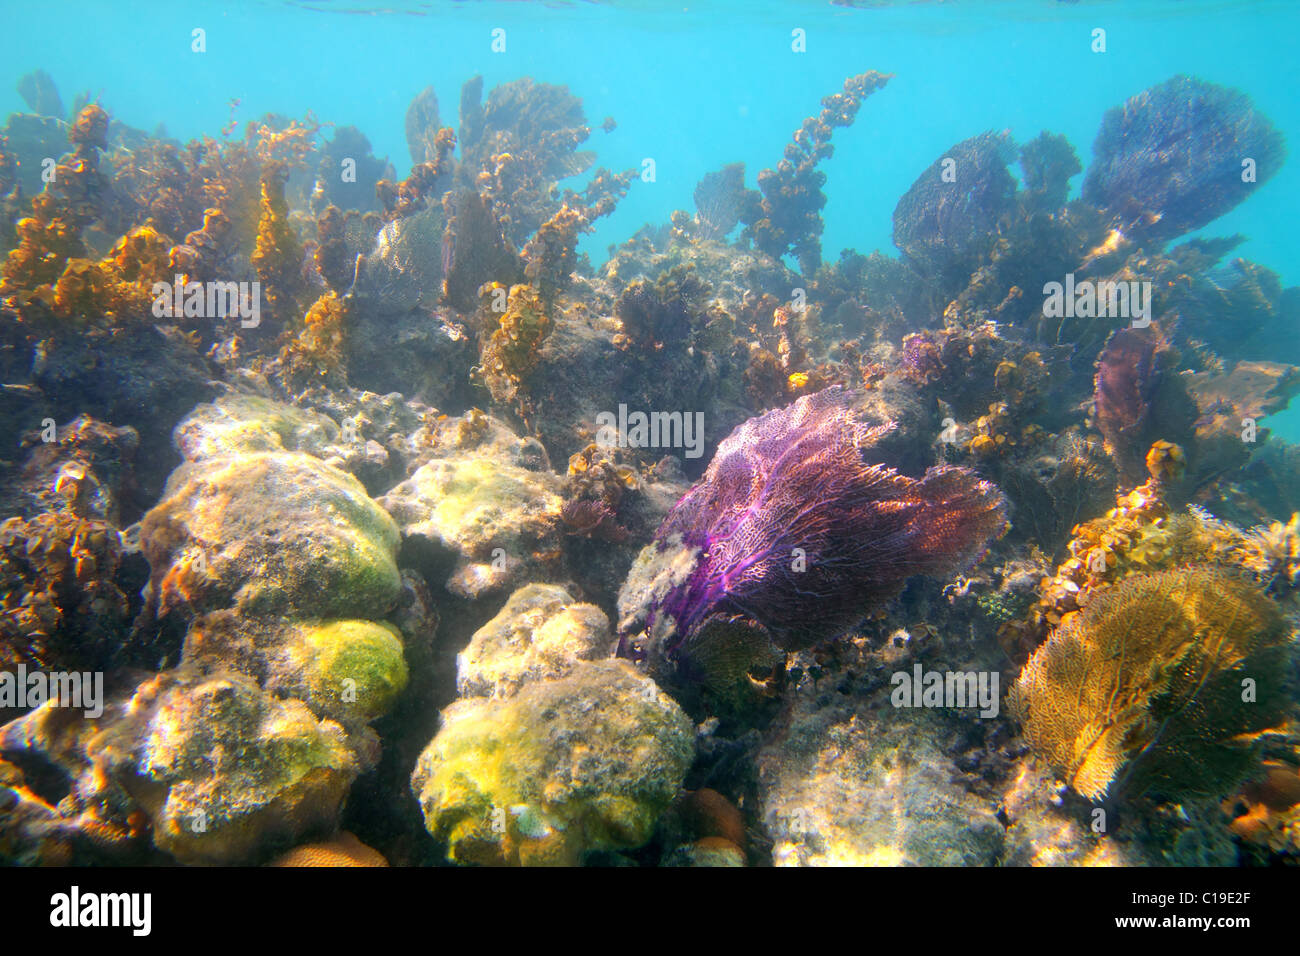 Caribbean tropical reef snorkeling in Mayan Riviera Mexico Stock Photo